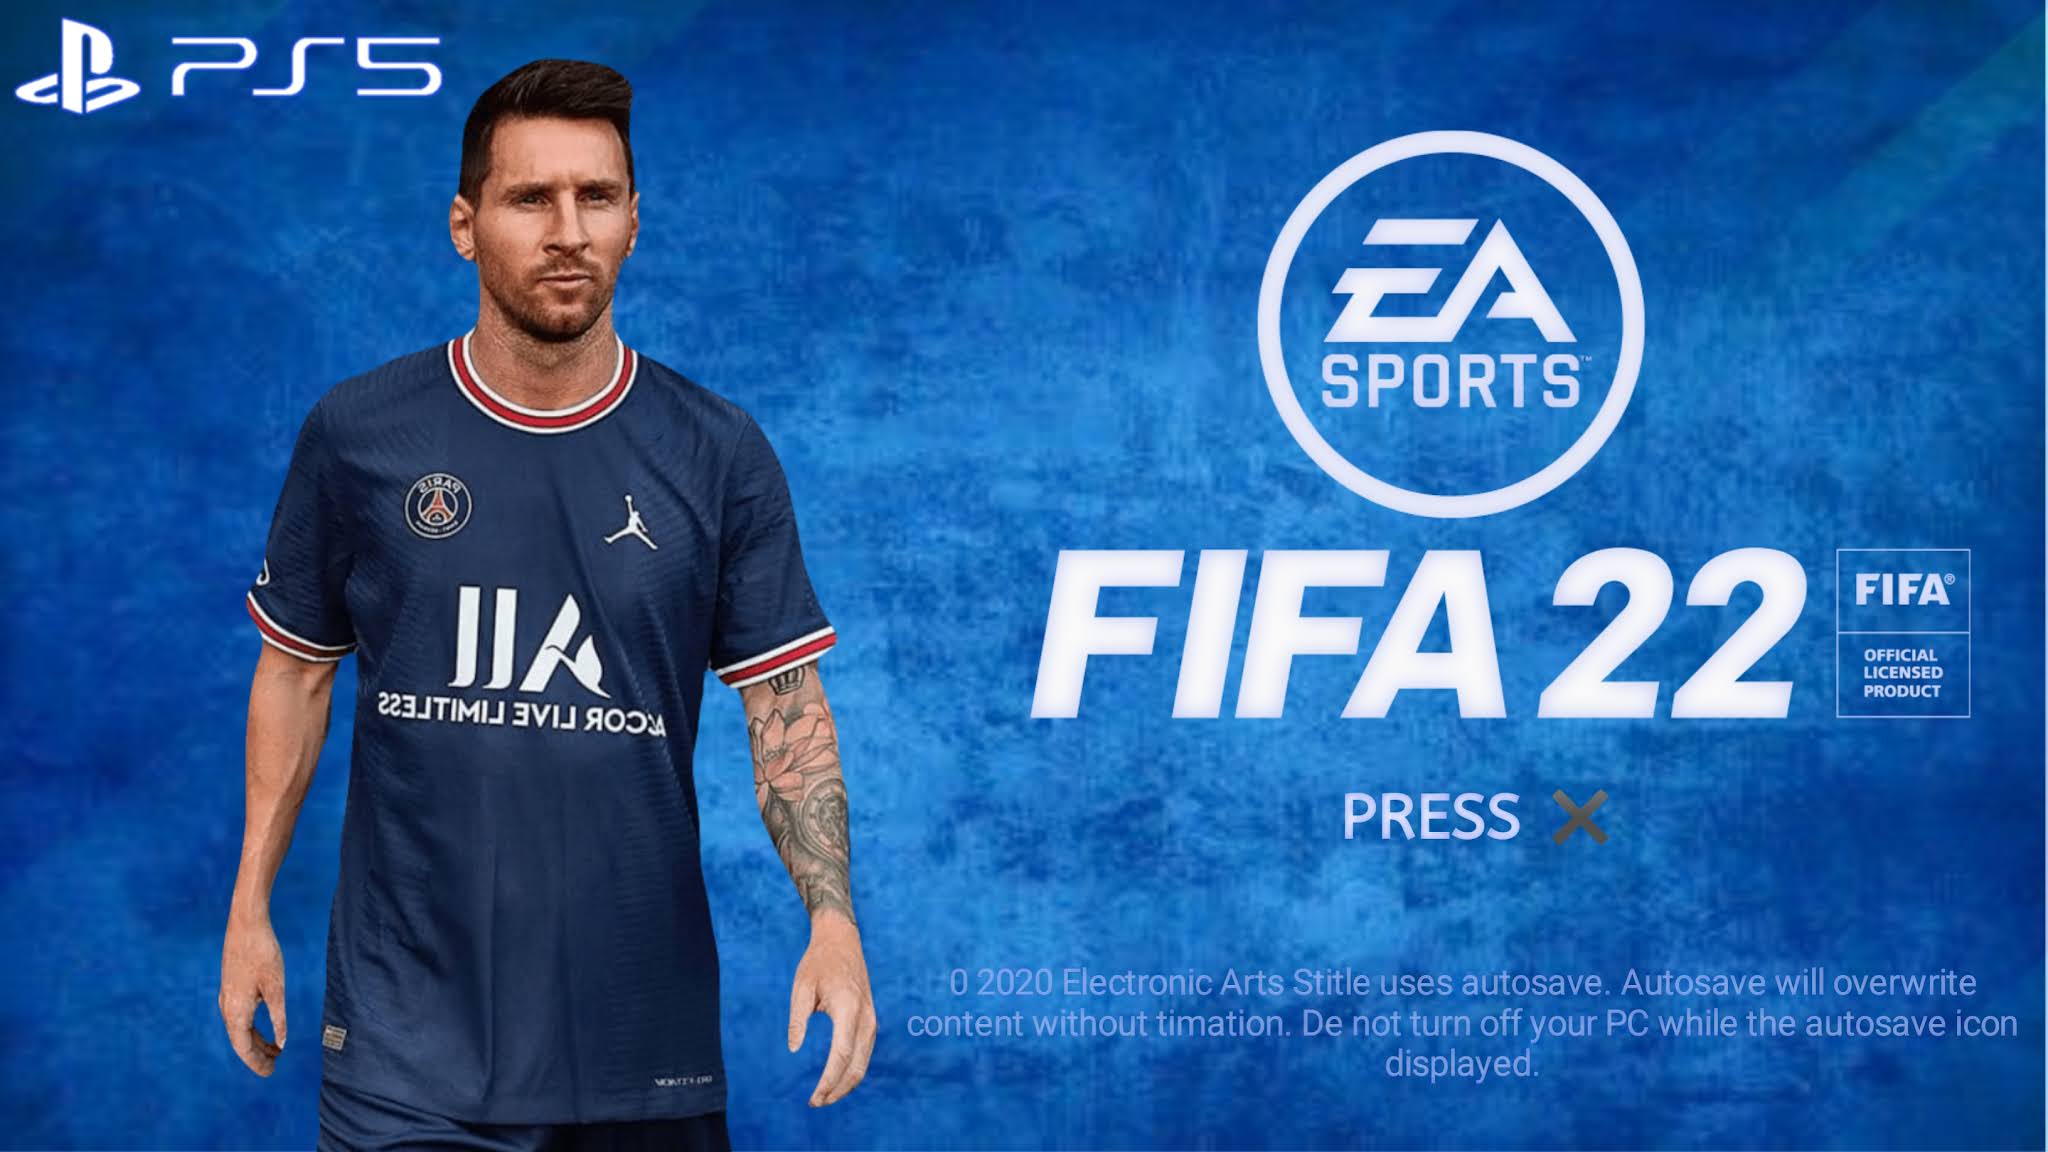 FIFA 22 Mobile - Download & Play FIFA 22 for Android APK & iOS -  : Download APK free online downloader